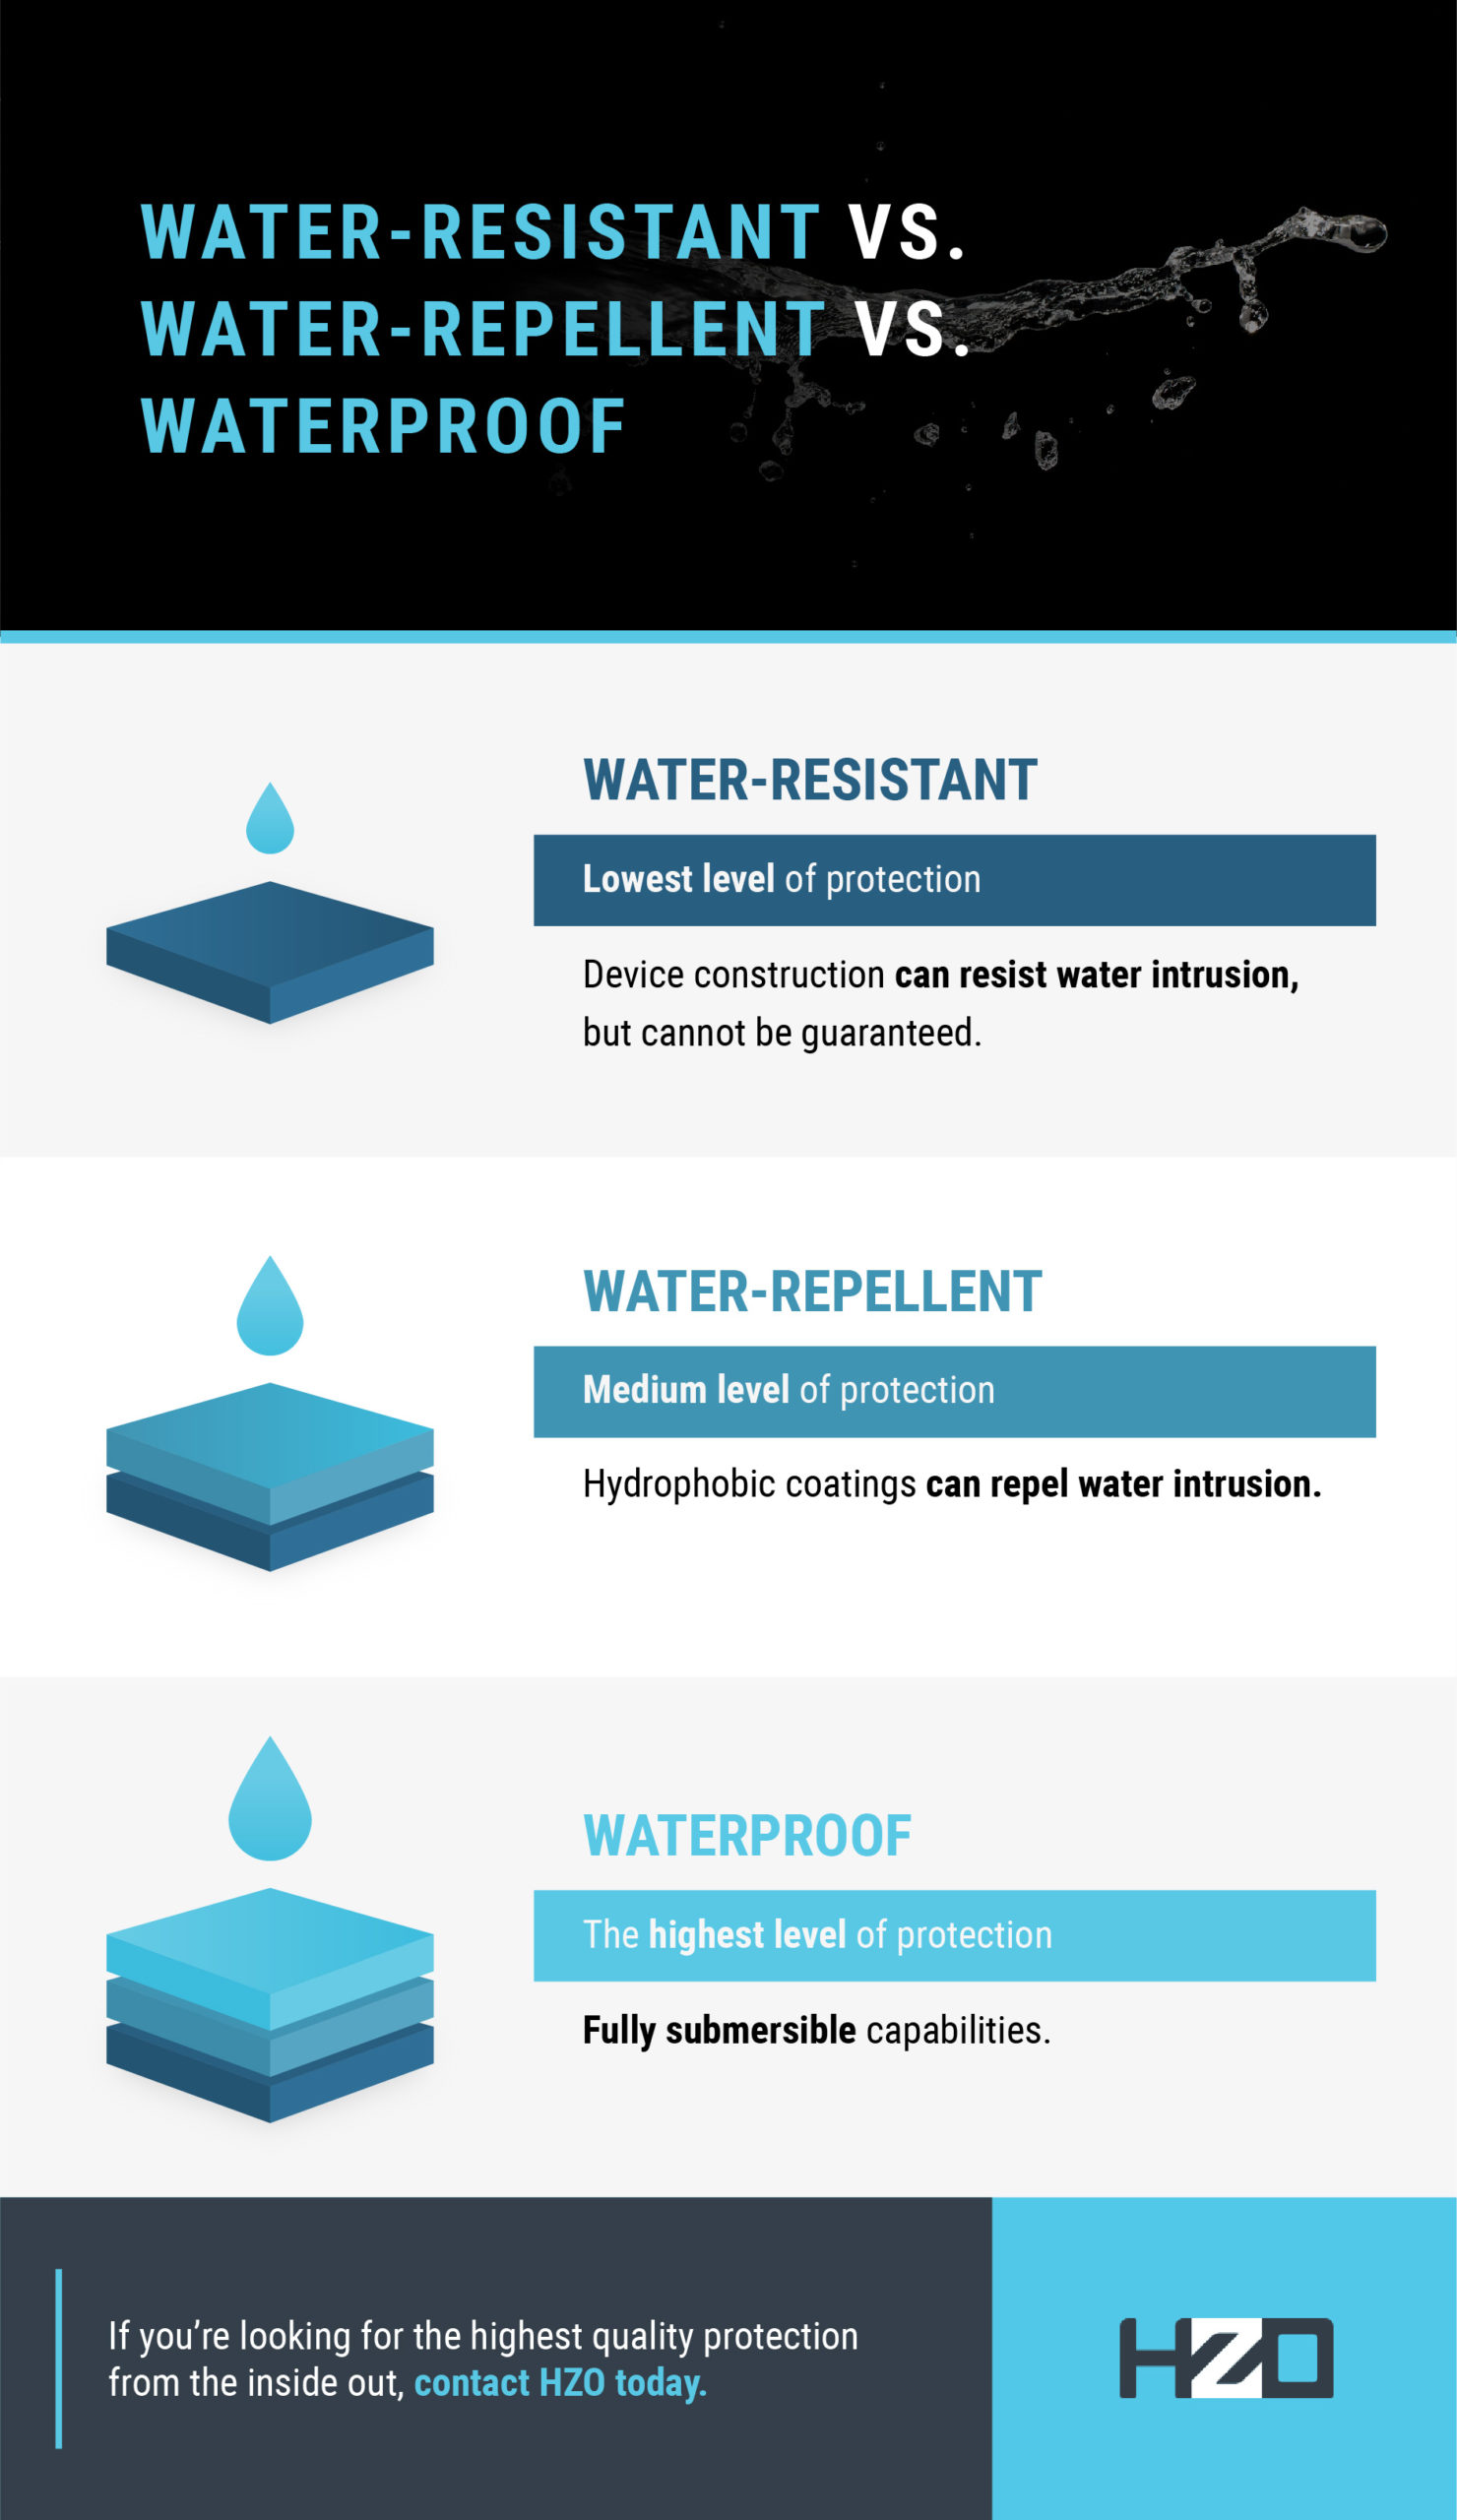 The difference between water-resistant, waterproof and water-repellent